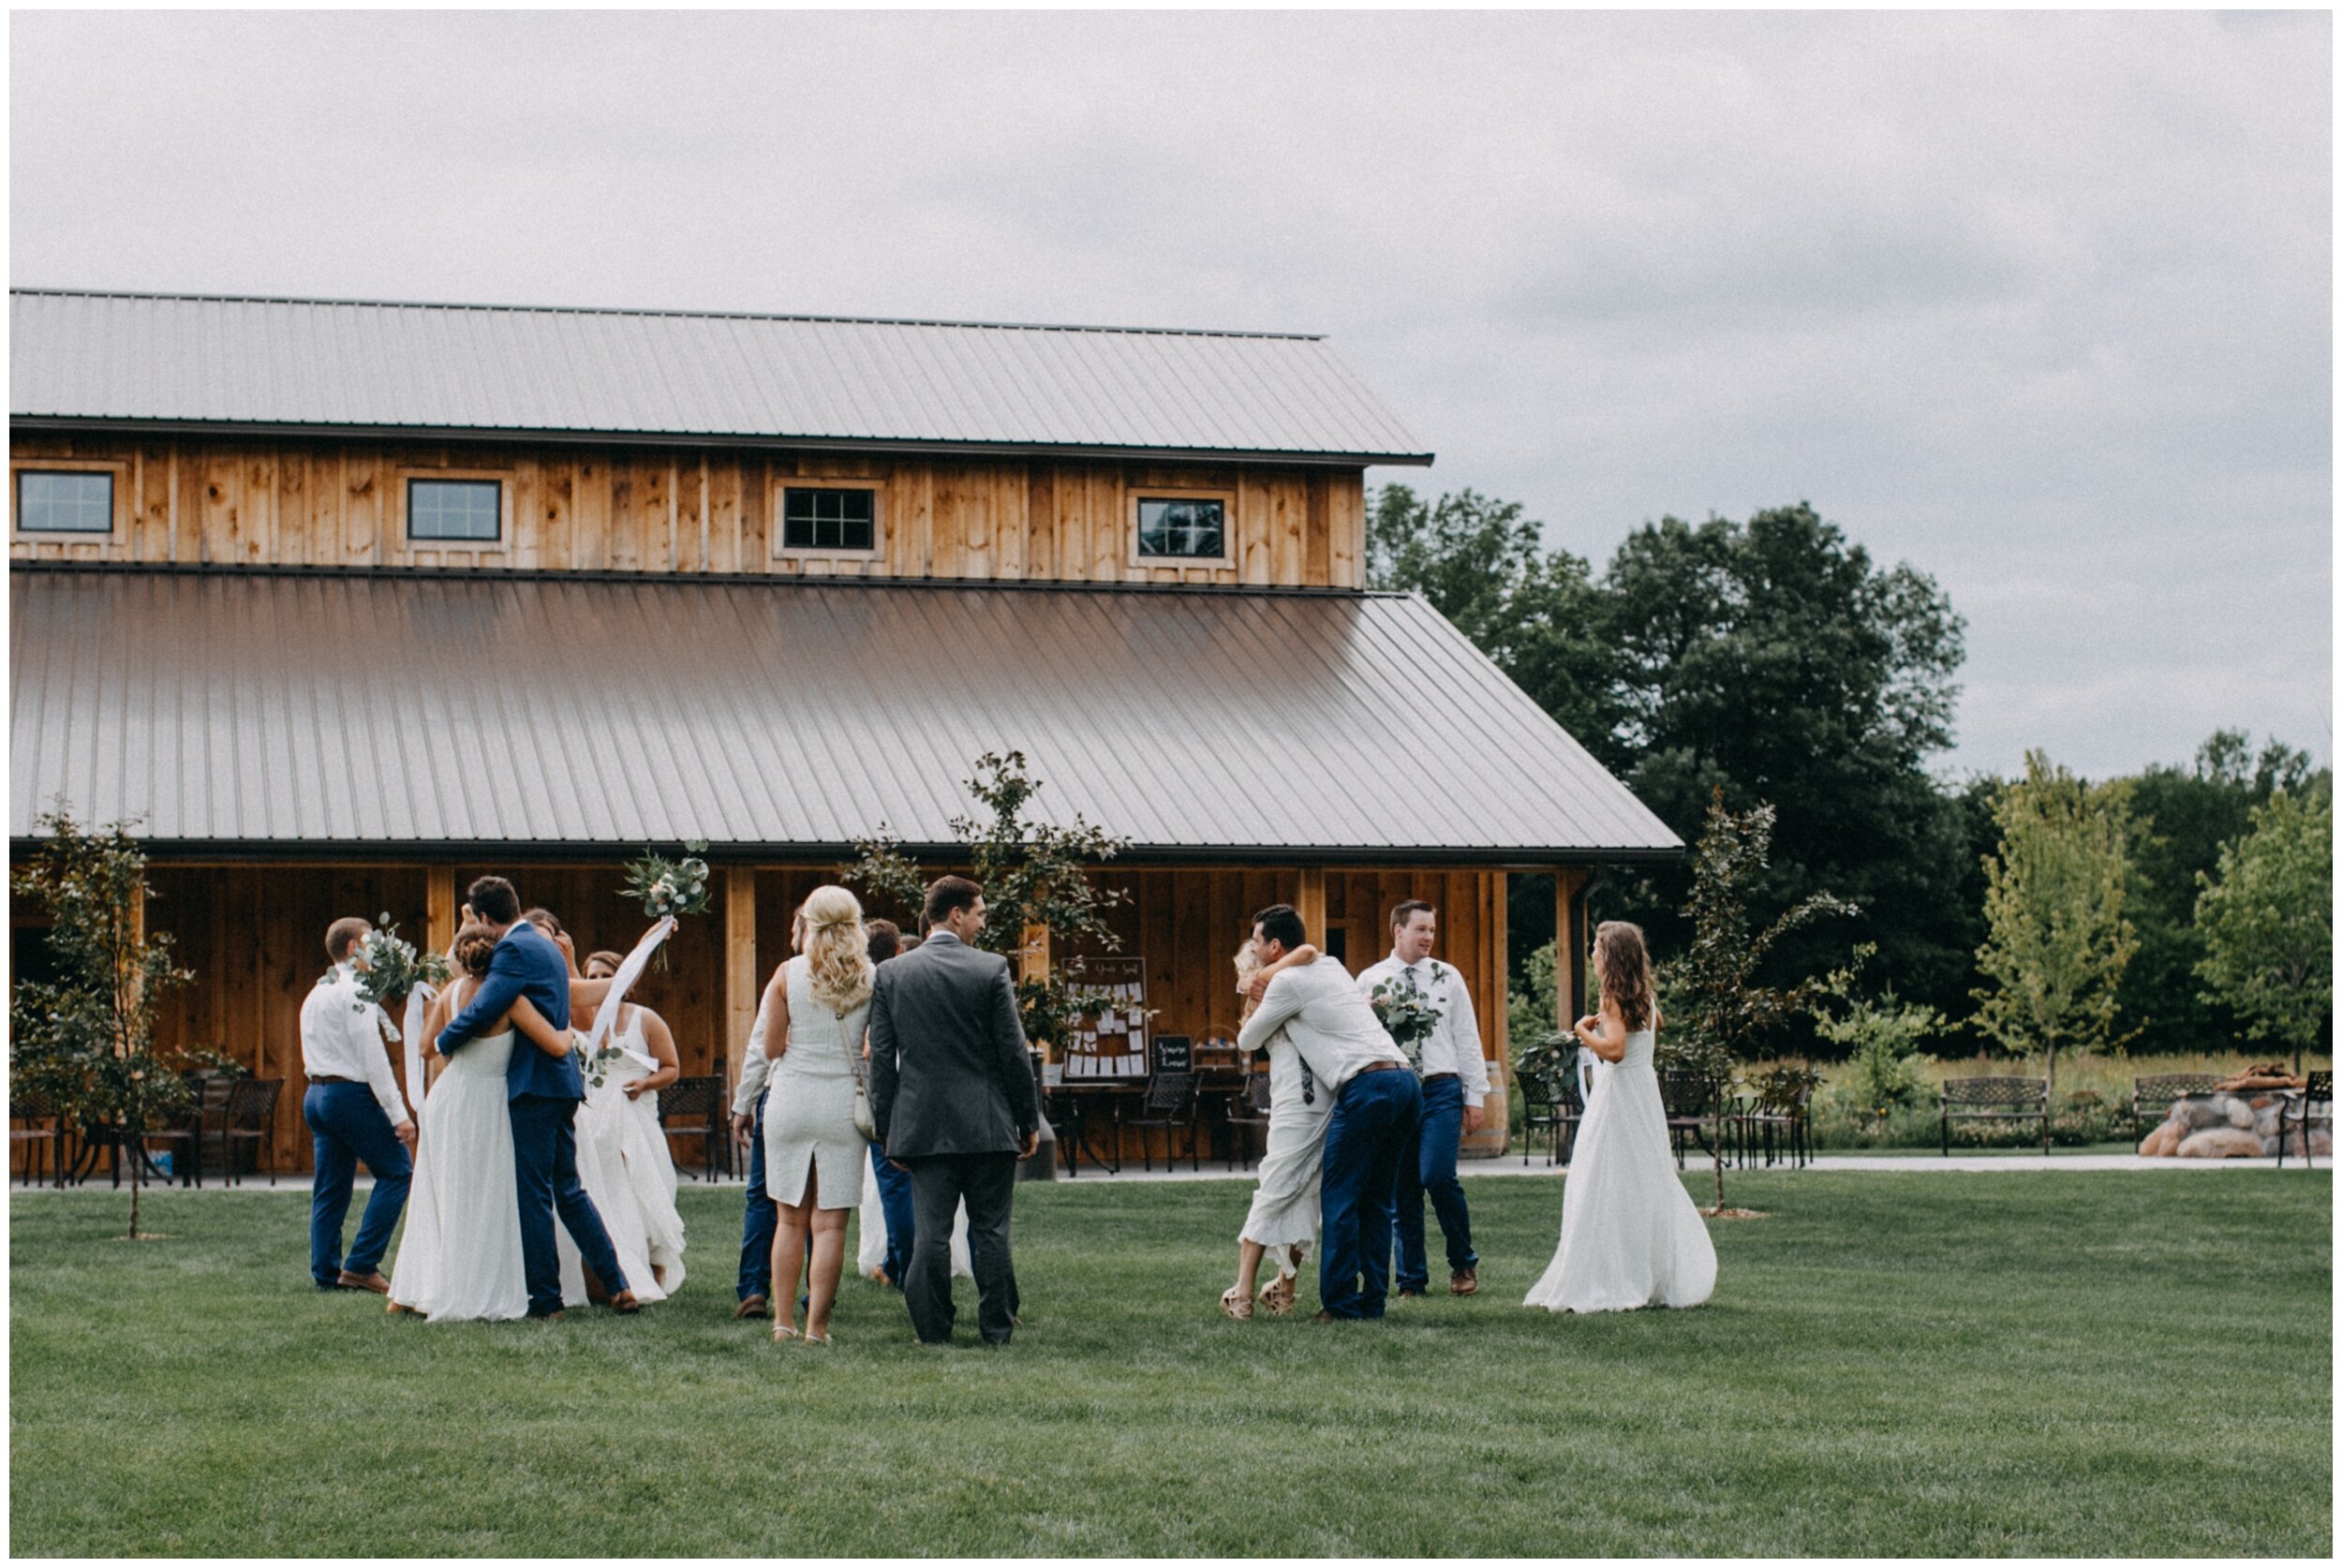 Wedding party celebrating in front of barn after outdoor summer wedding ceremony at Creekside Farm